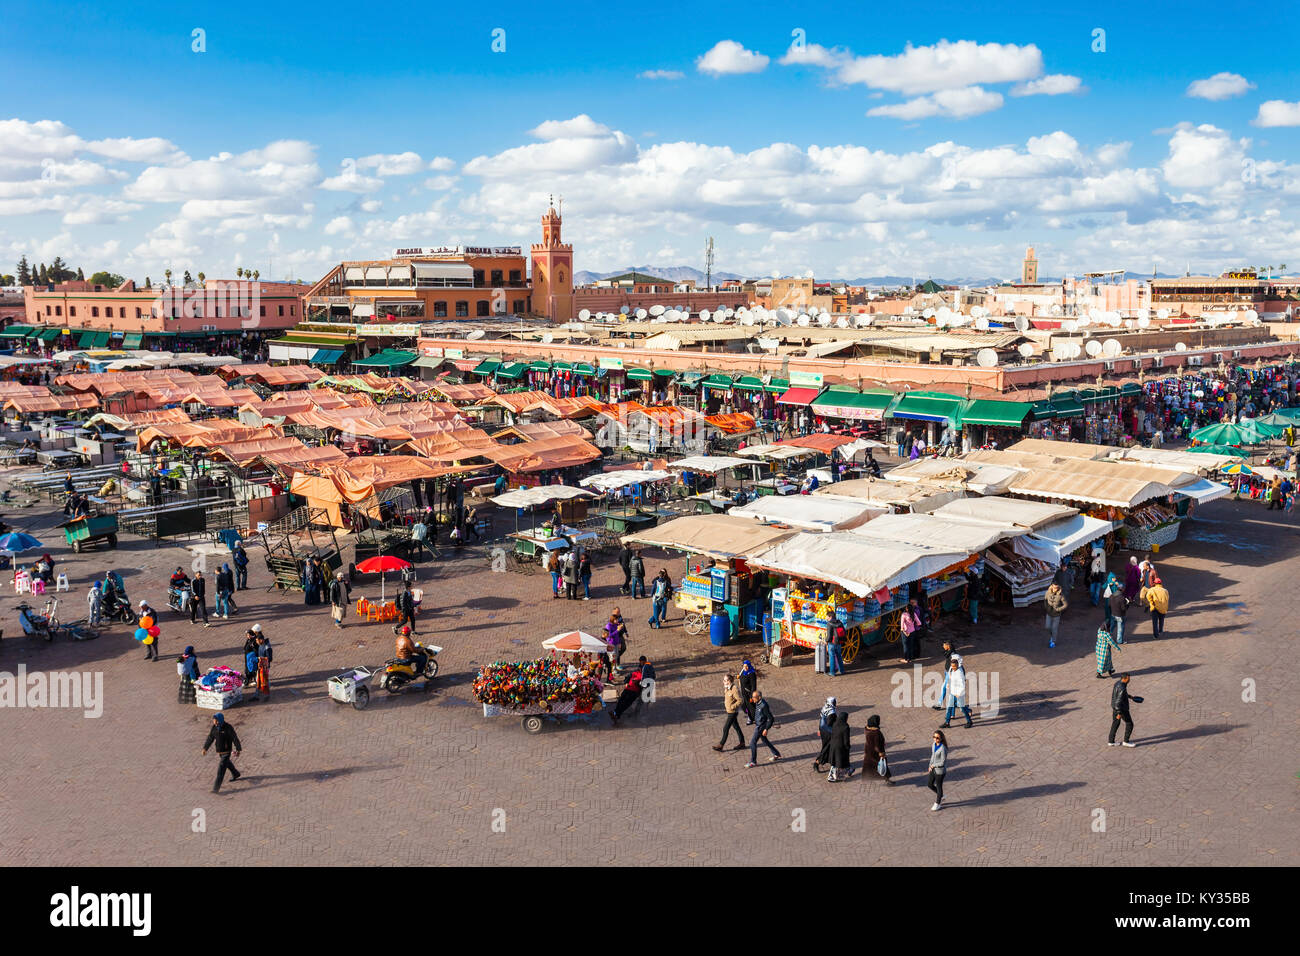 MARRAKECH, MOROCCO - FEBRUARY 22, 2016: Jemaa el Fna (also Jemaa el-Fnaa, Djema el-Fna or Djemaa el-Fnaa) is a square and market place in Marrakesh's  Stock Photo